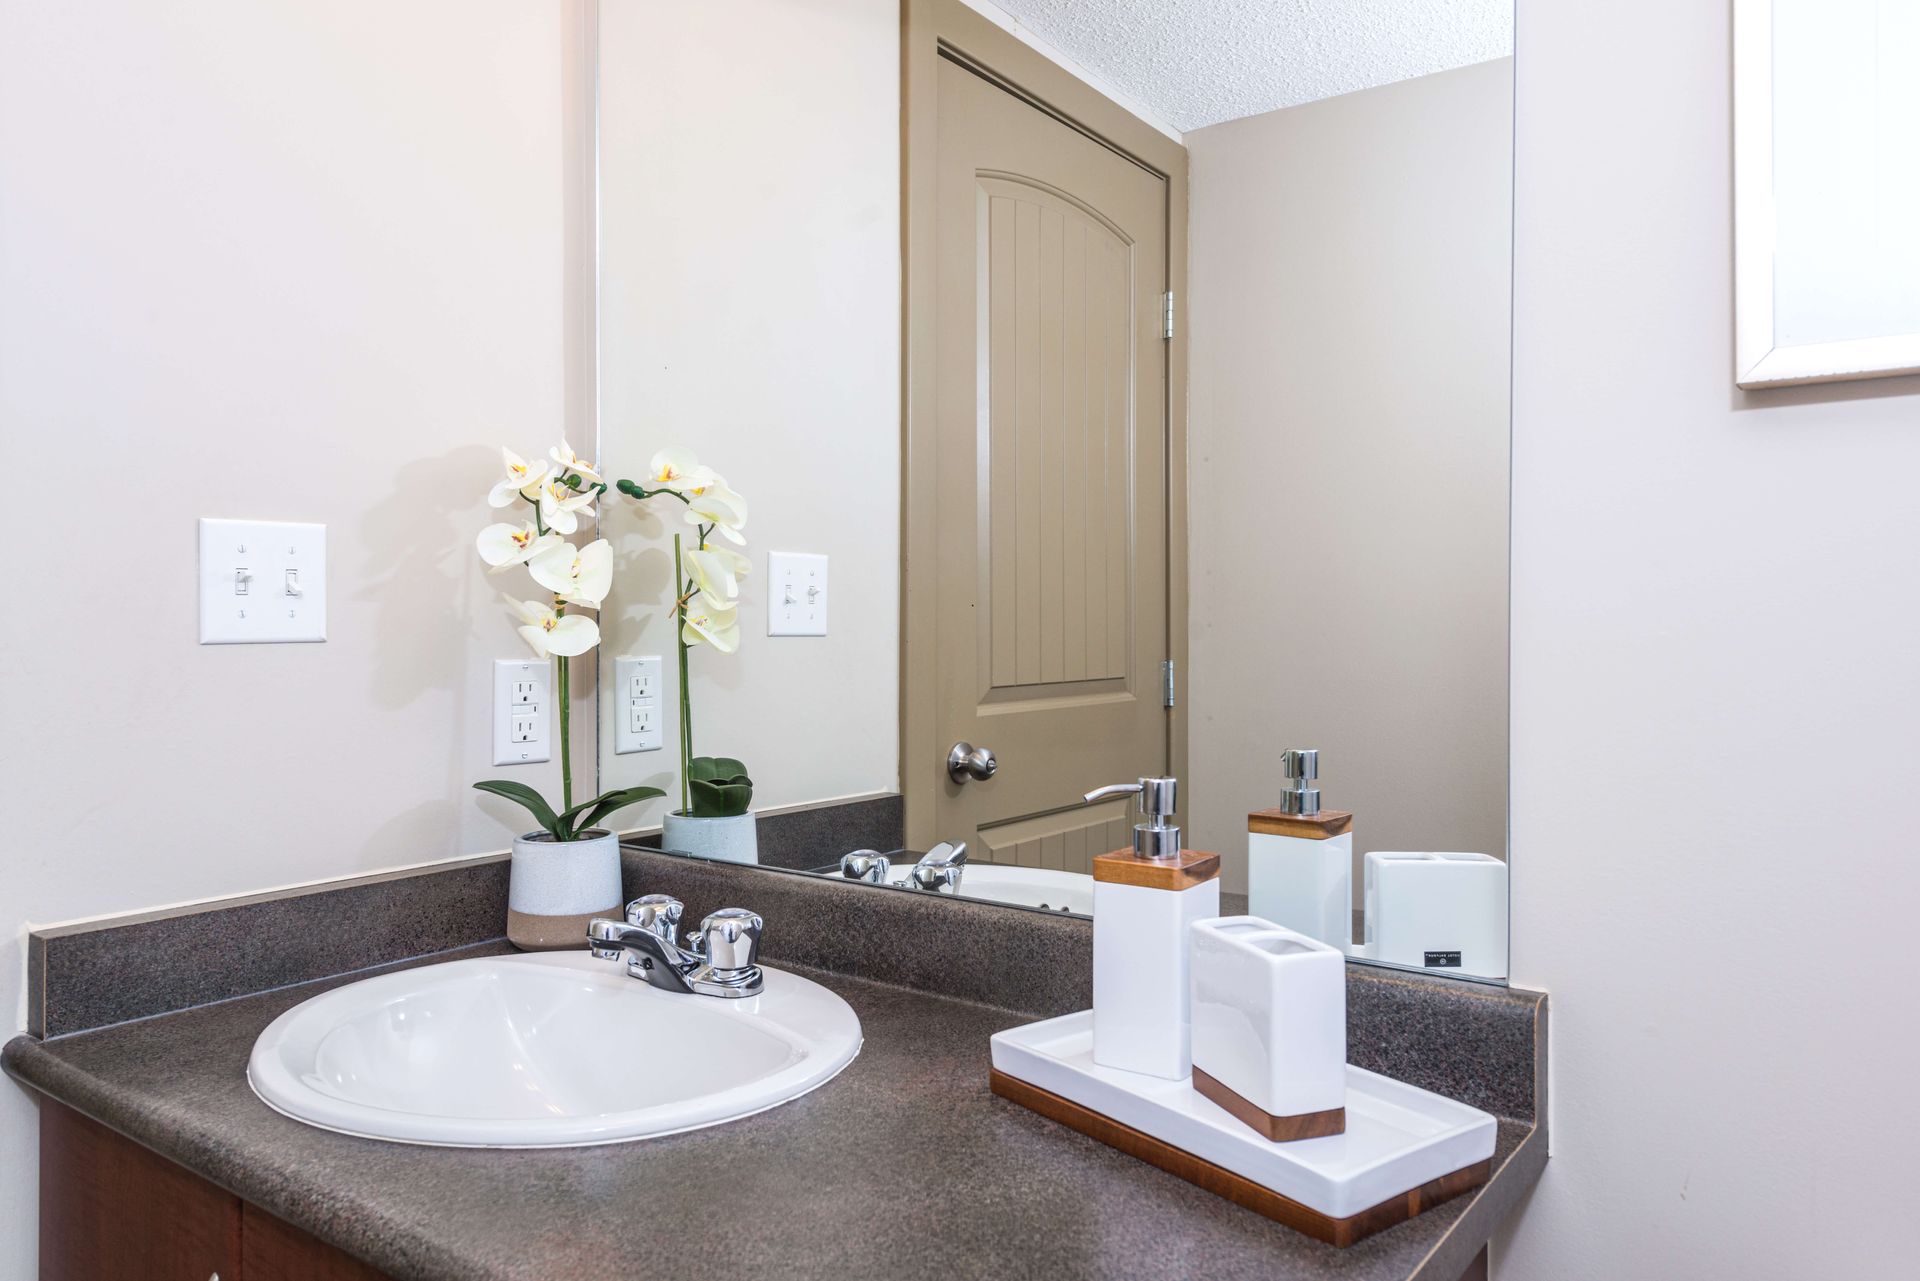 Bathroom at the Lake Windermere Pointe Condos in Invermere, BC managed by Aisling Baile Property Management